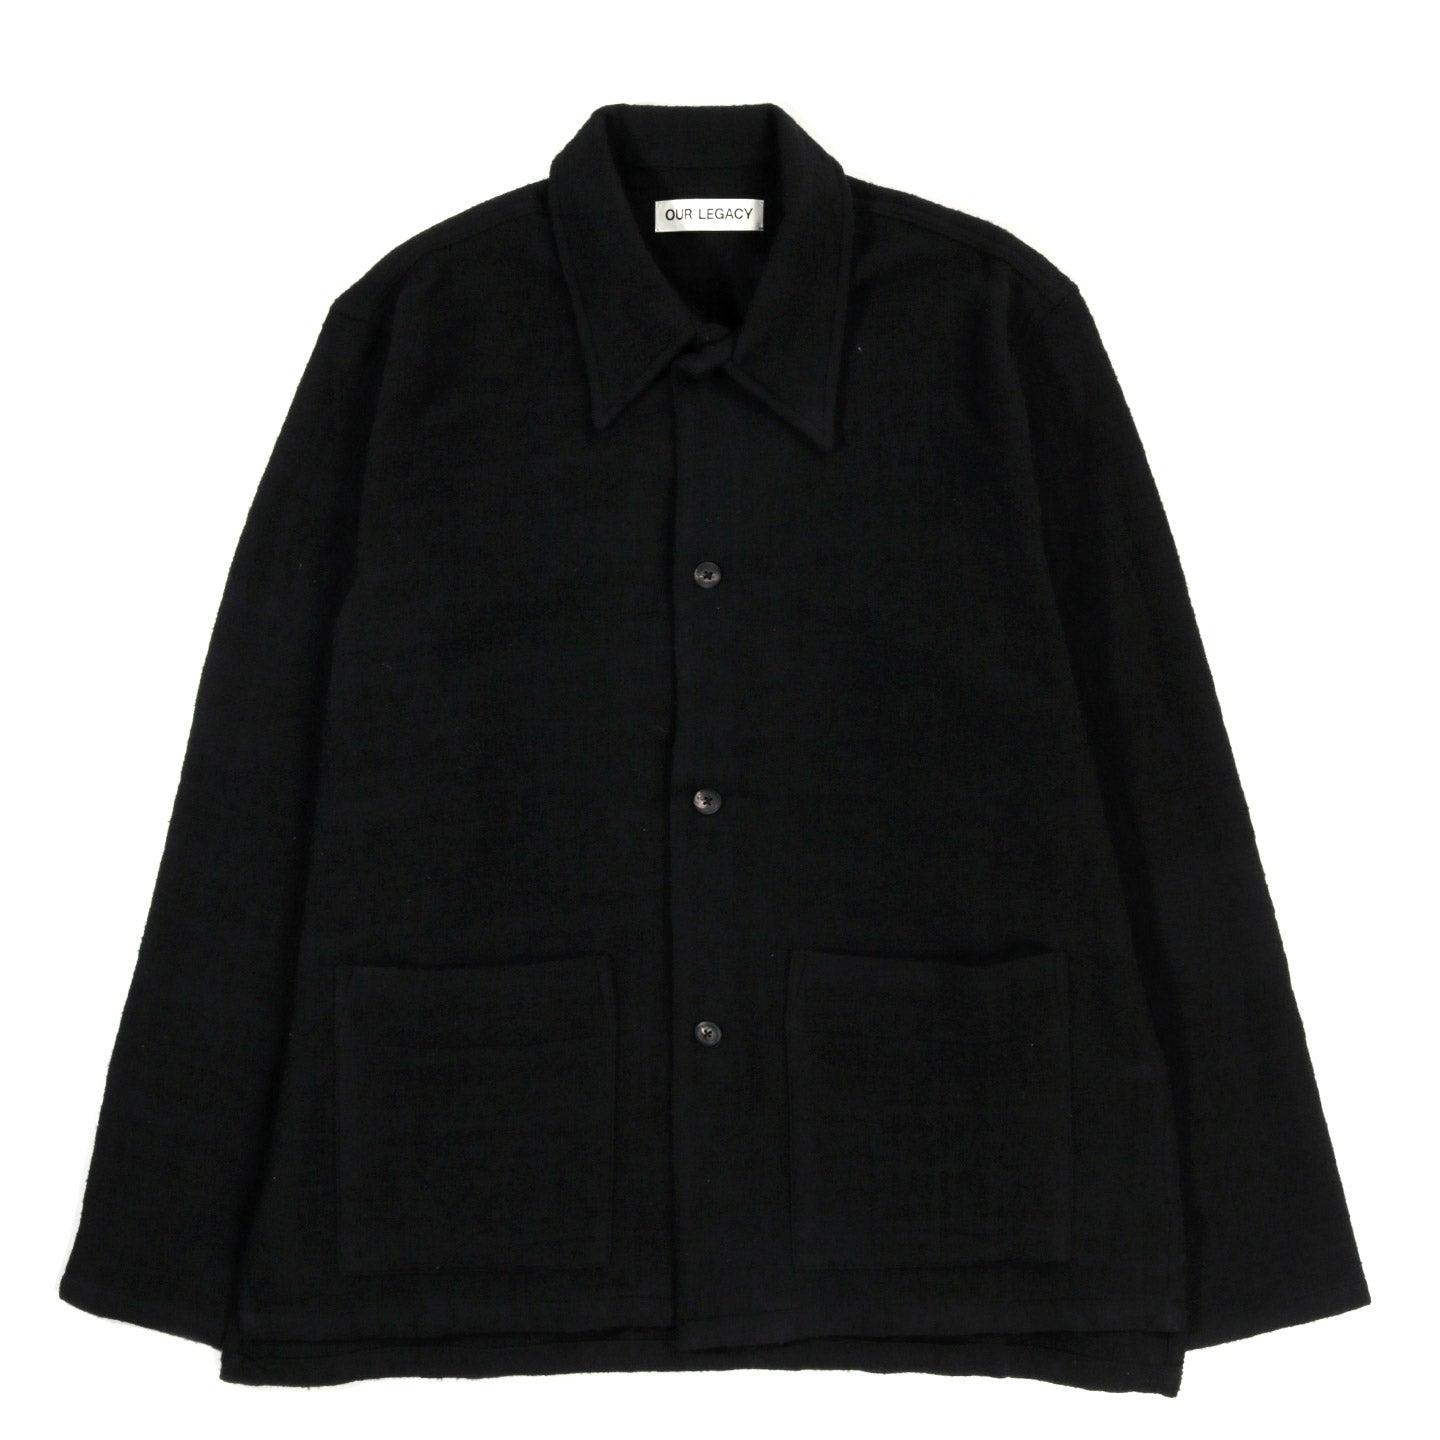 OUR LEGACY HAVEN JACKET BLACK PANKOW CHECK | TODAY CLOTHING